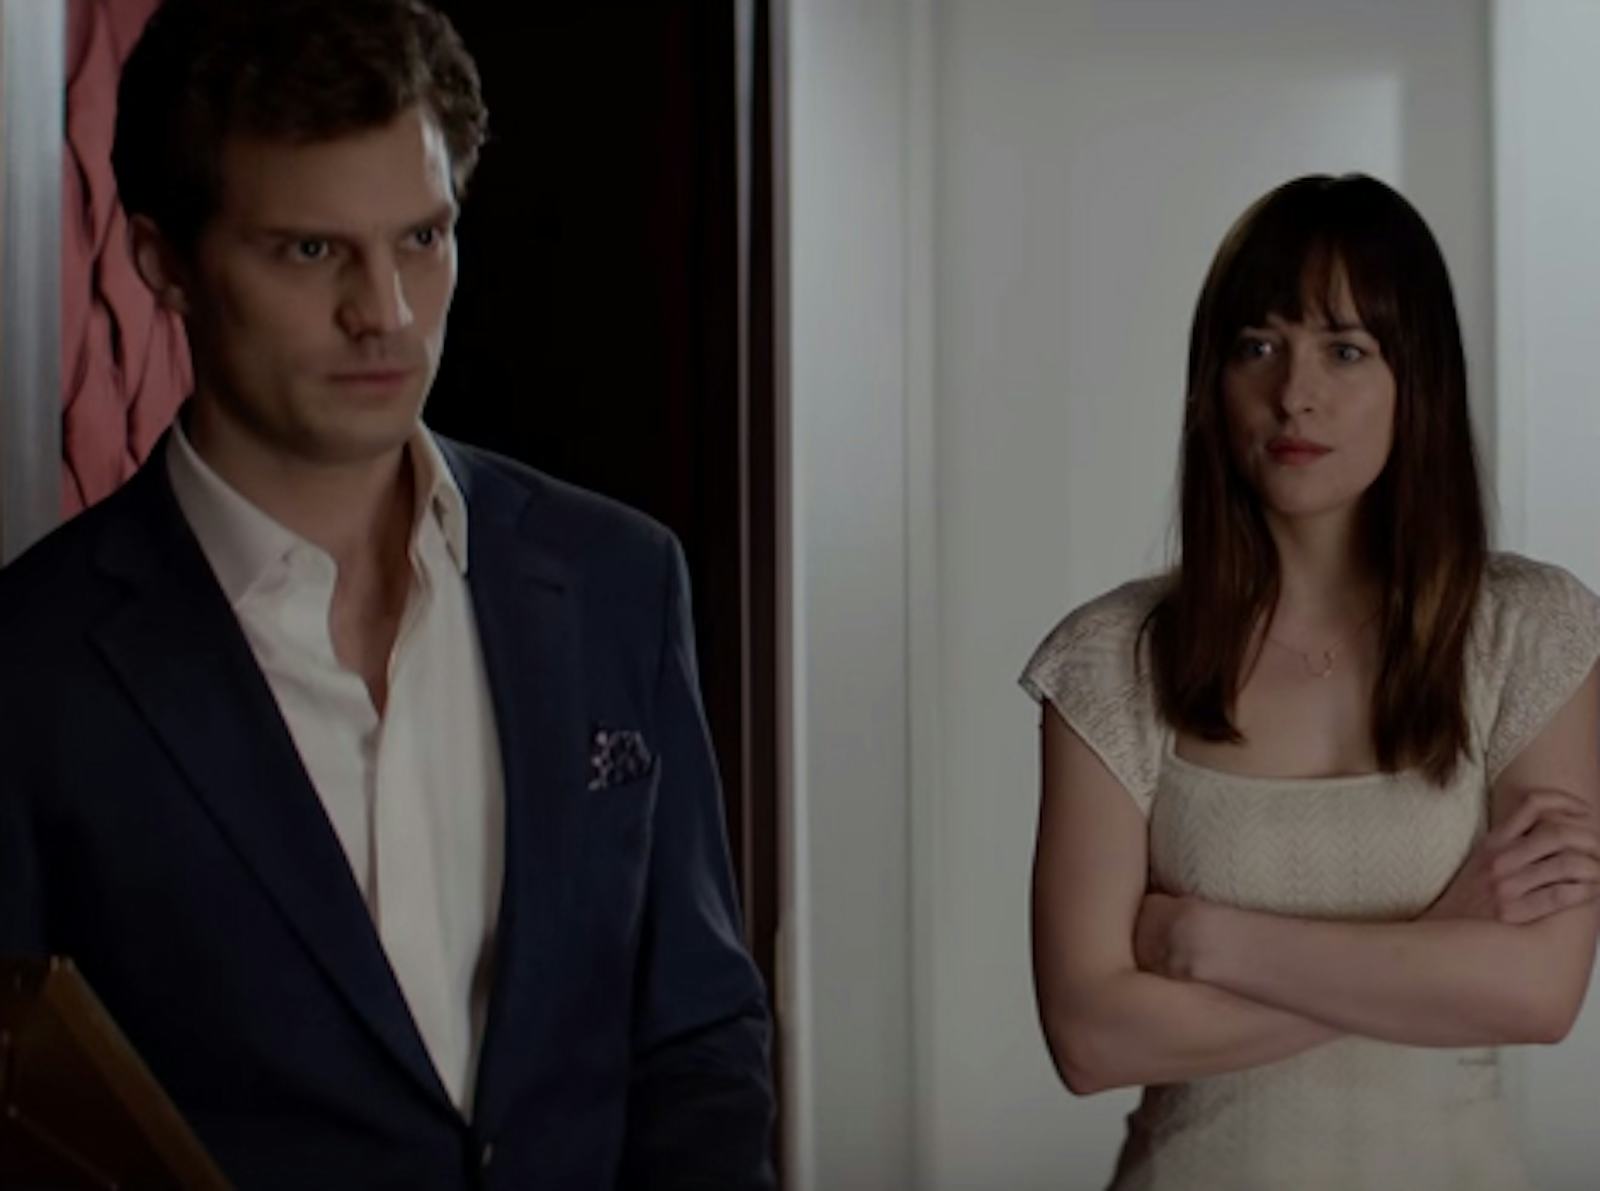 Creative Fifty Shades Of Grey Costume That Lets You Dress As Actual 